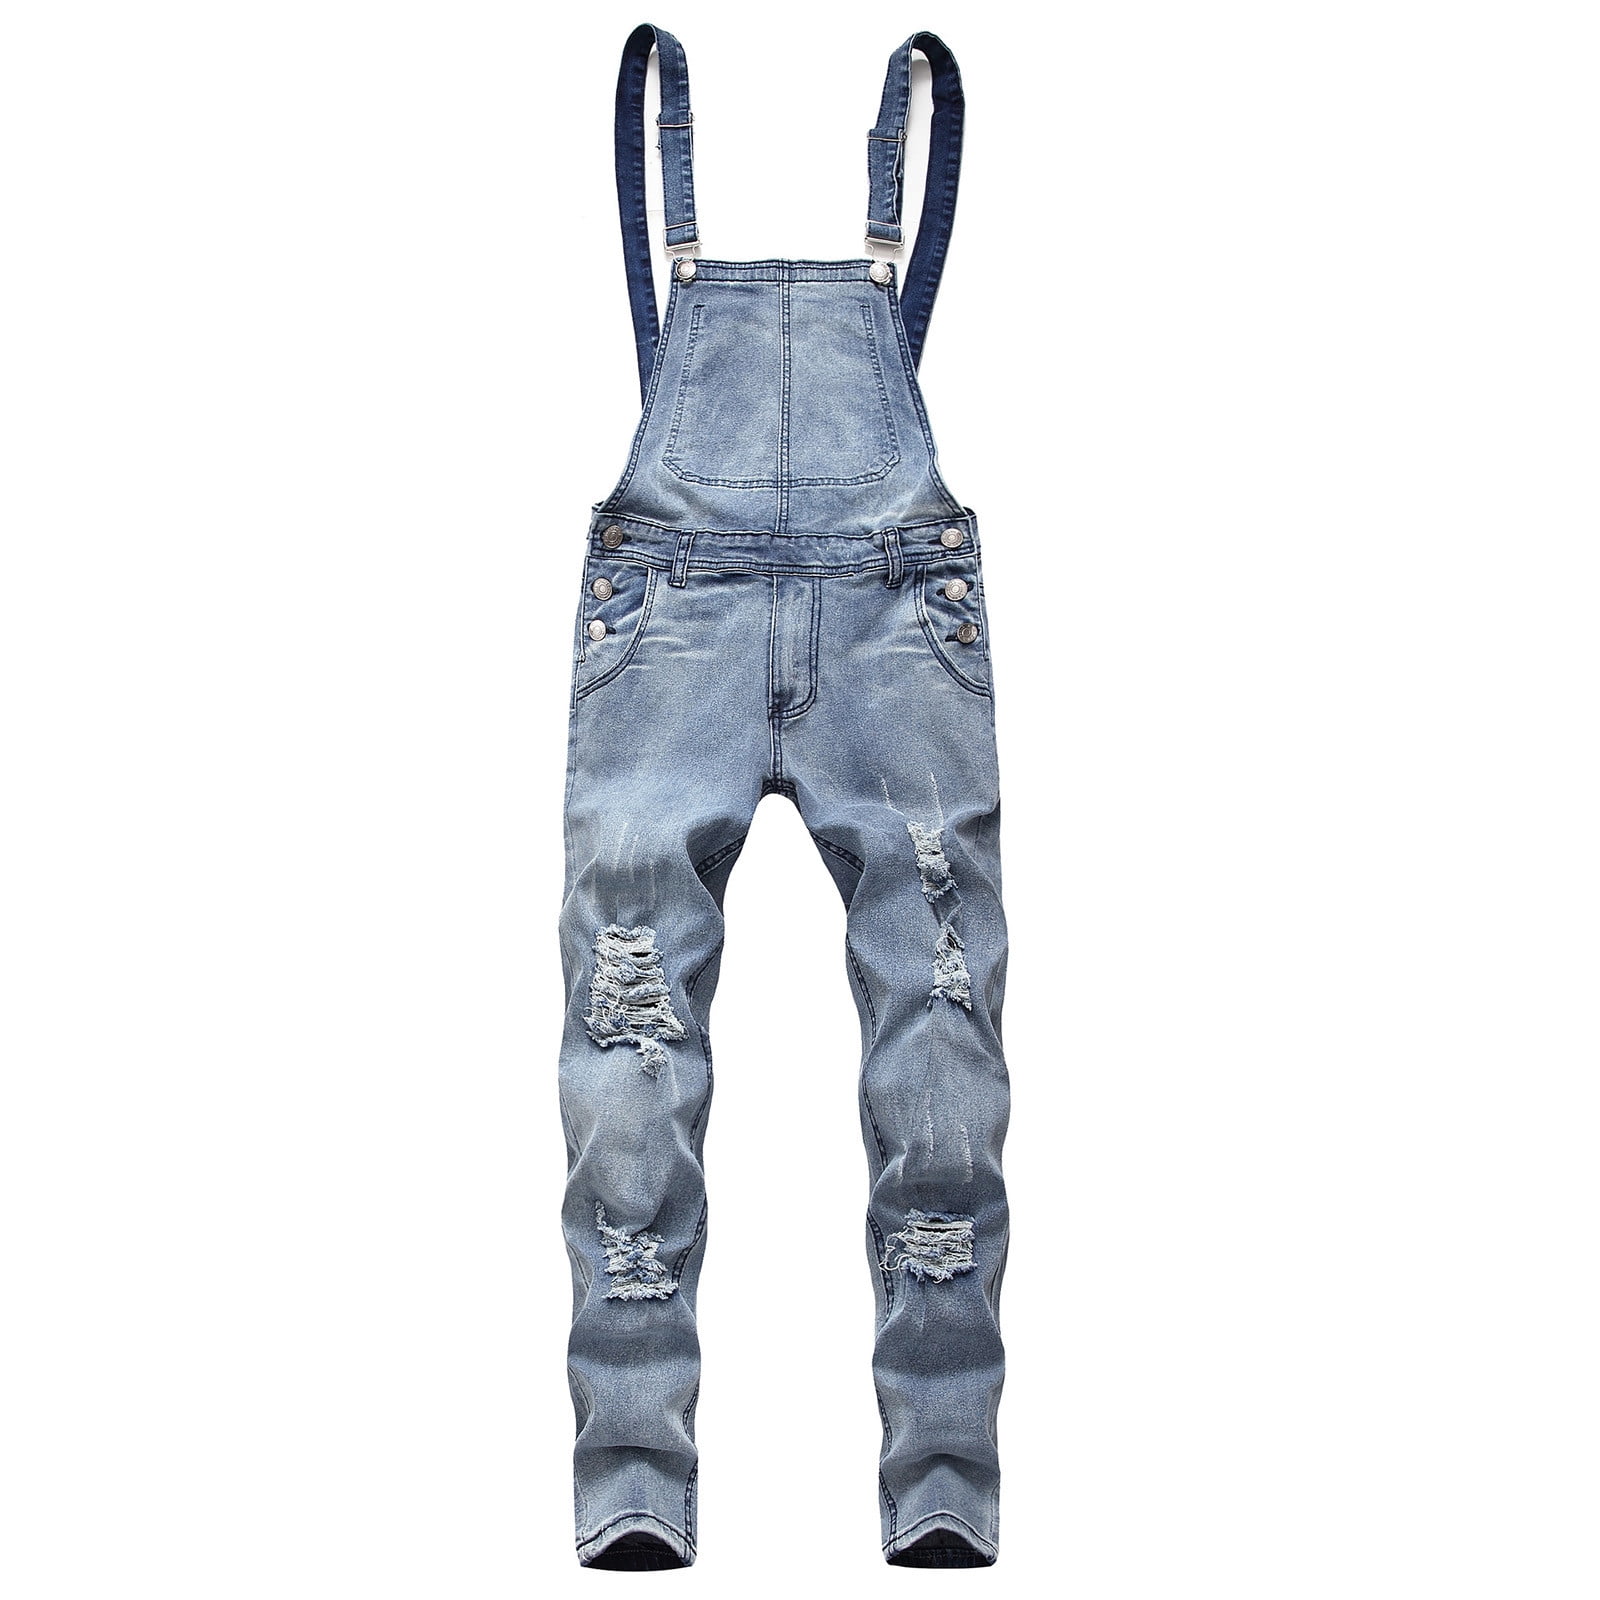 Men's All in One Cargo Work Harem Jumpsuit Playsuit Dungarees Overalls Trousers 